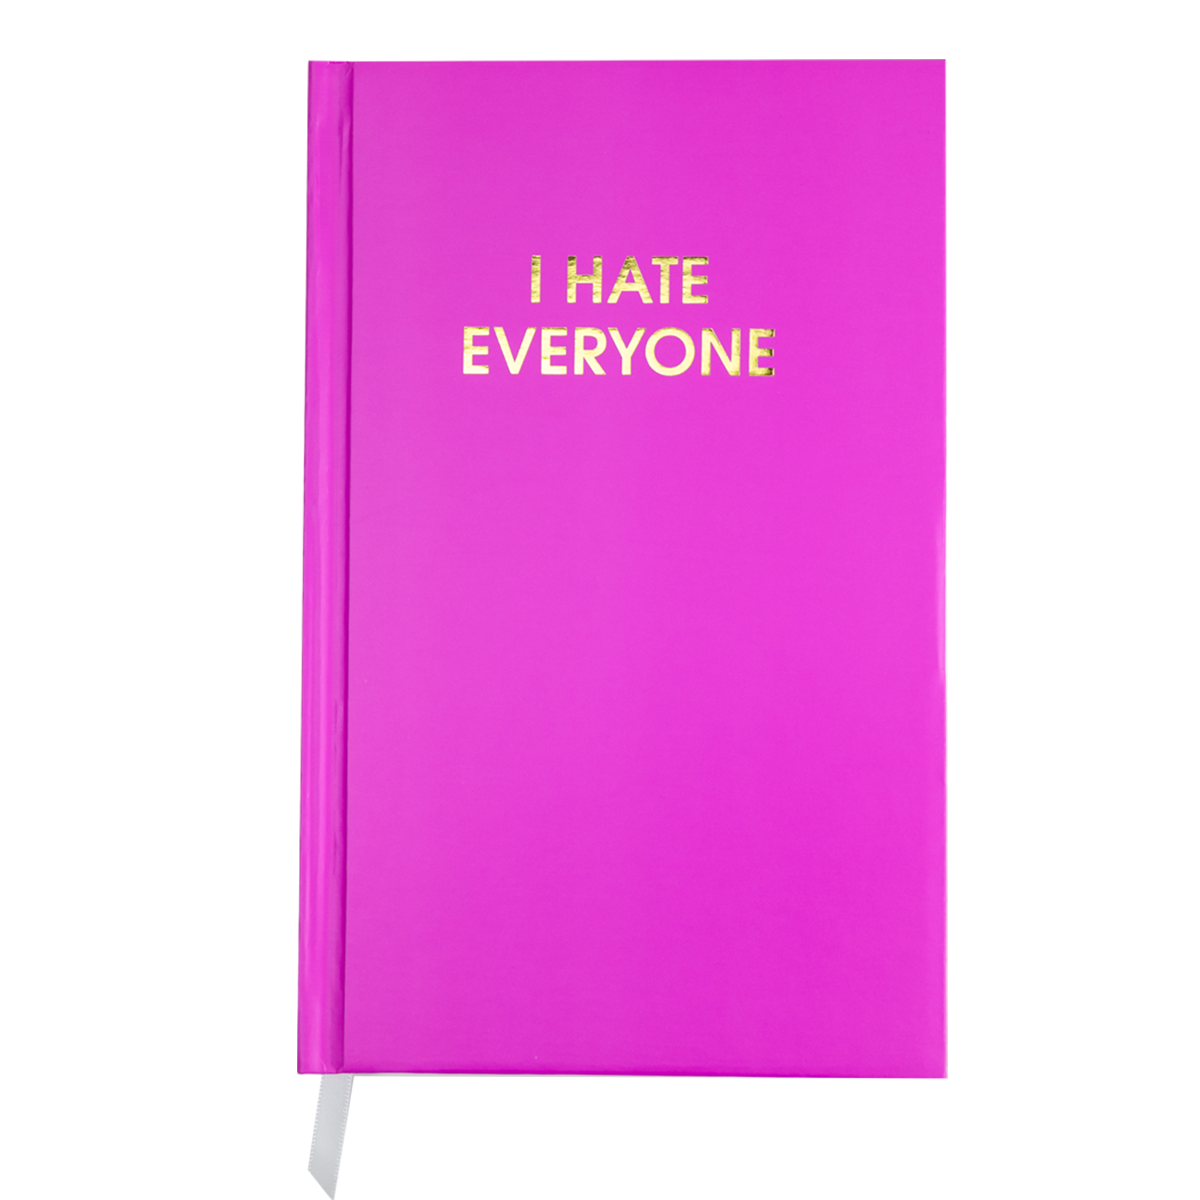 I Hate Everyone - Orchid Hardcover Journal